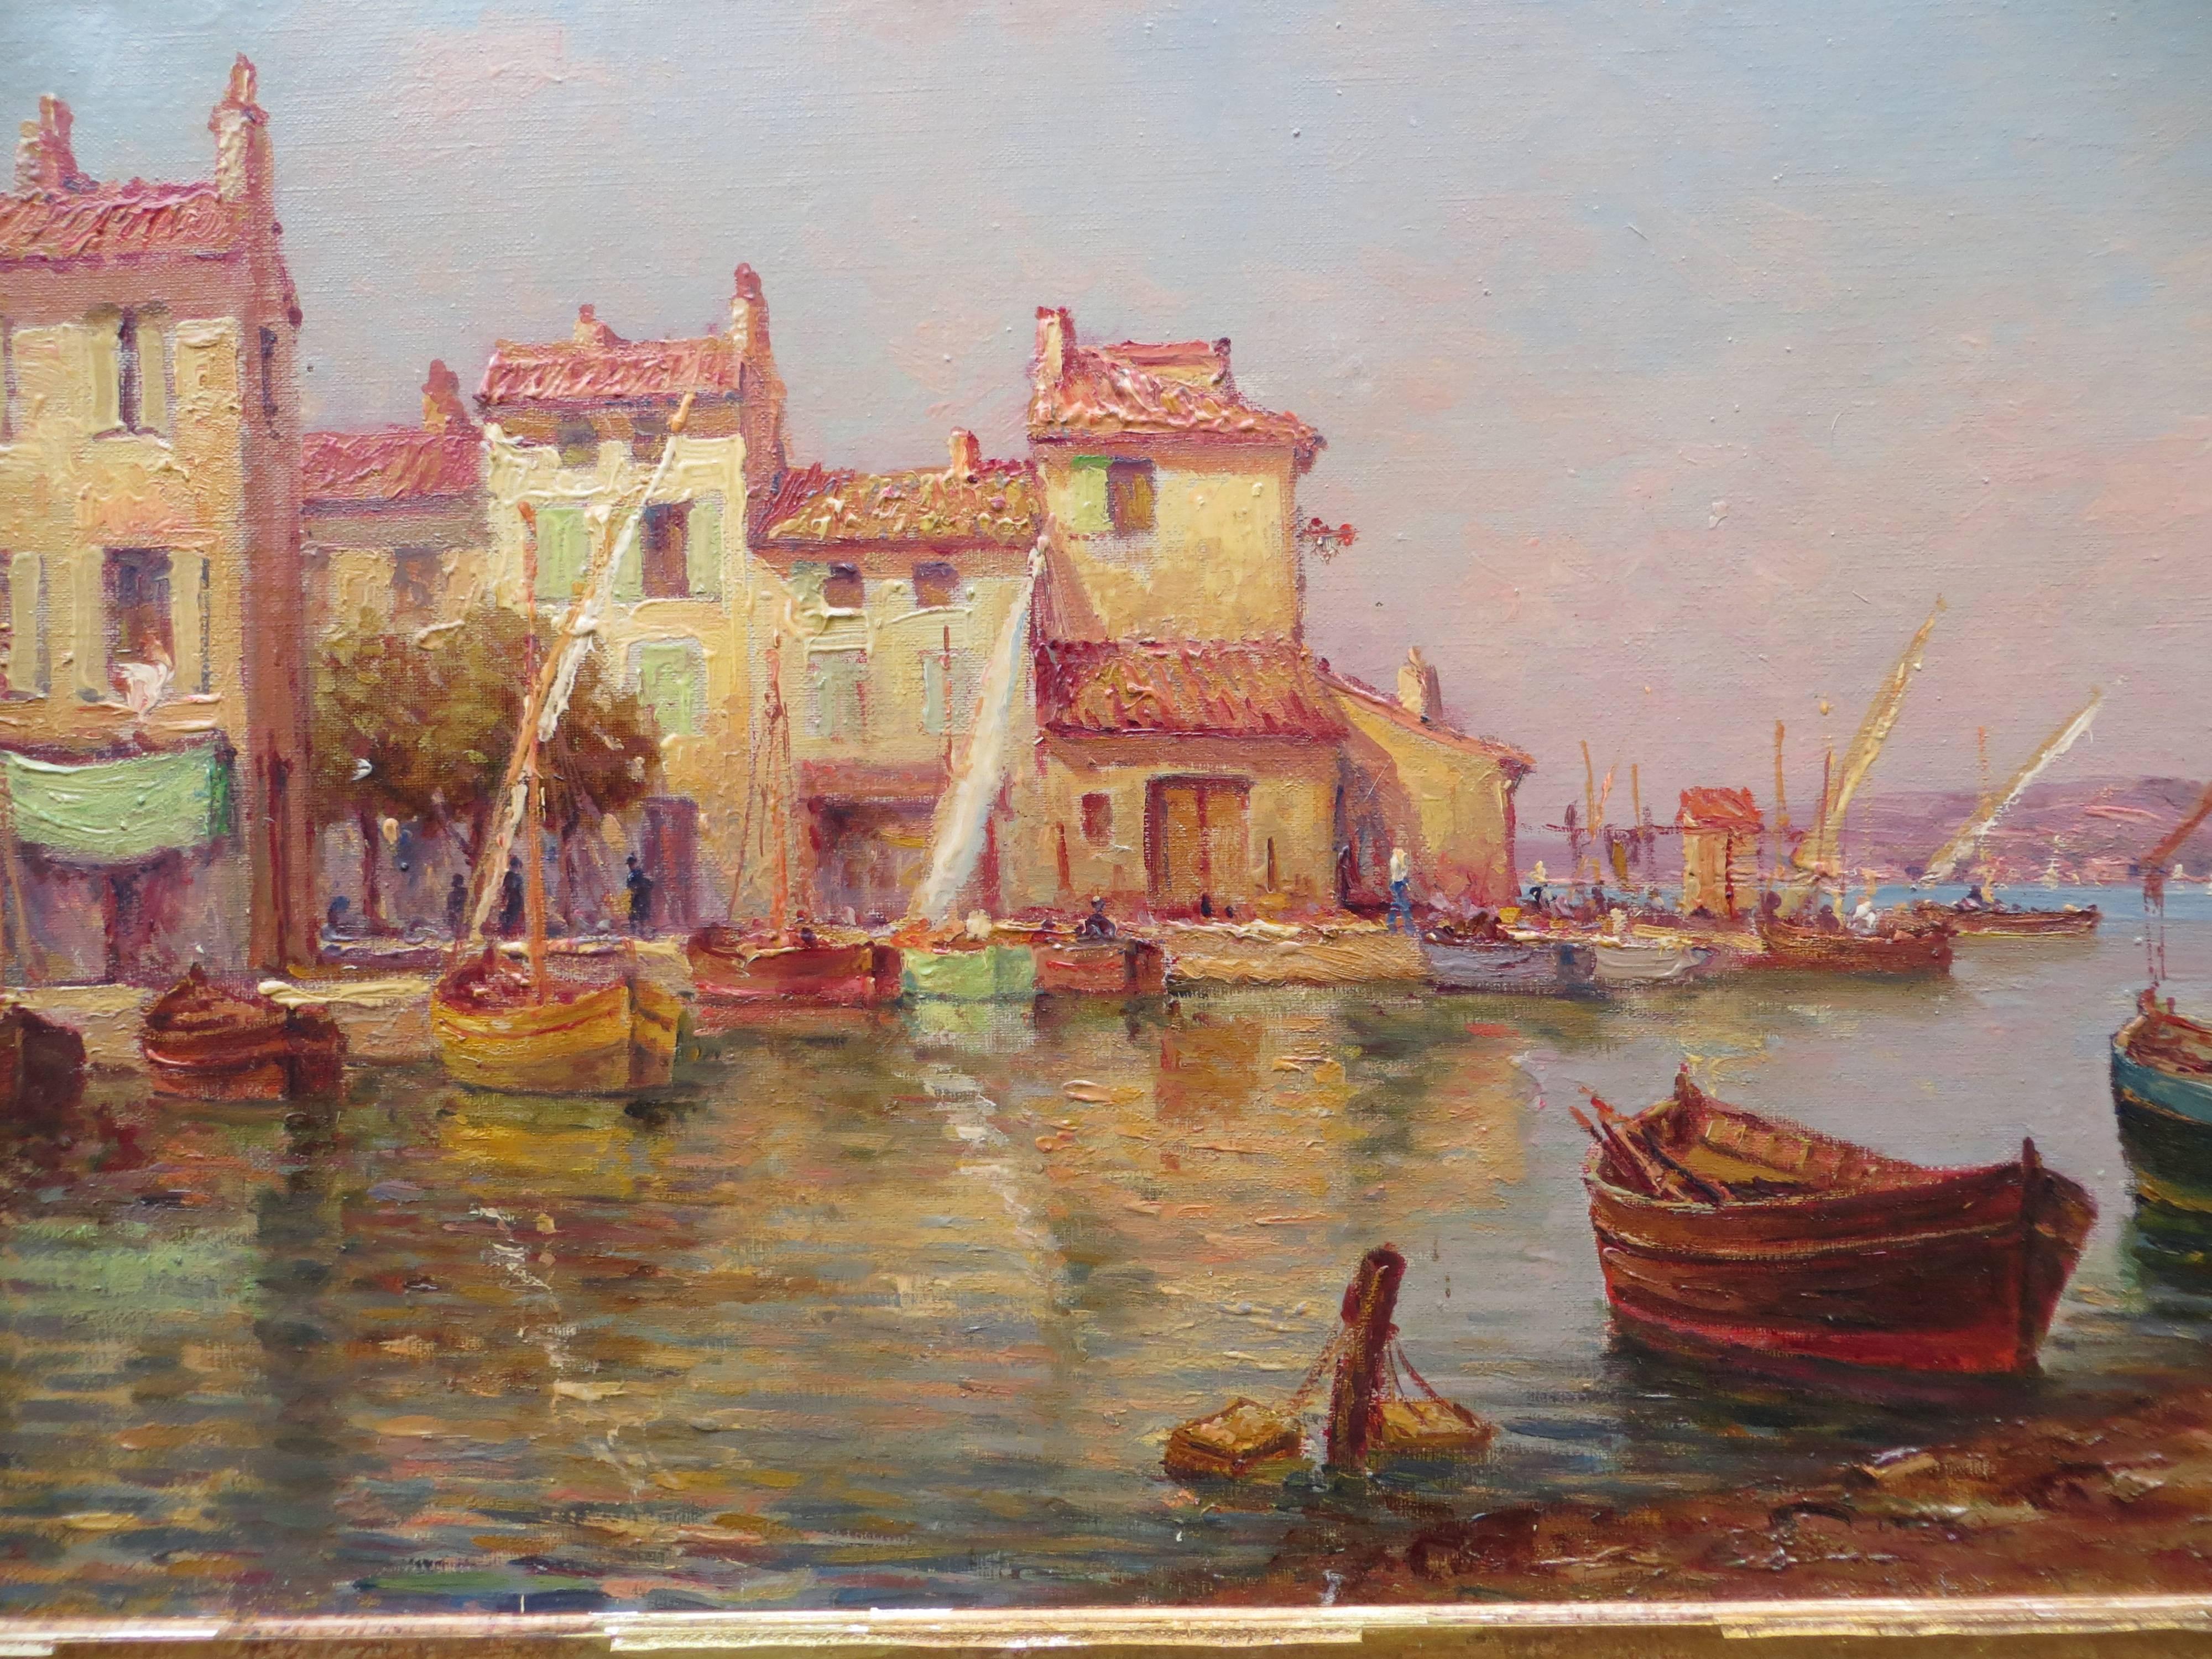 The Martigues by Henri  Malfroy - Post-Impressionist Painting by Henri Malfrou-Savigny